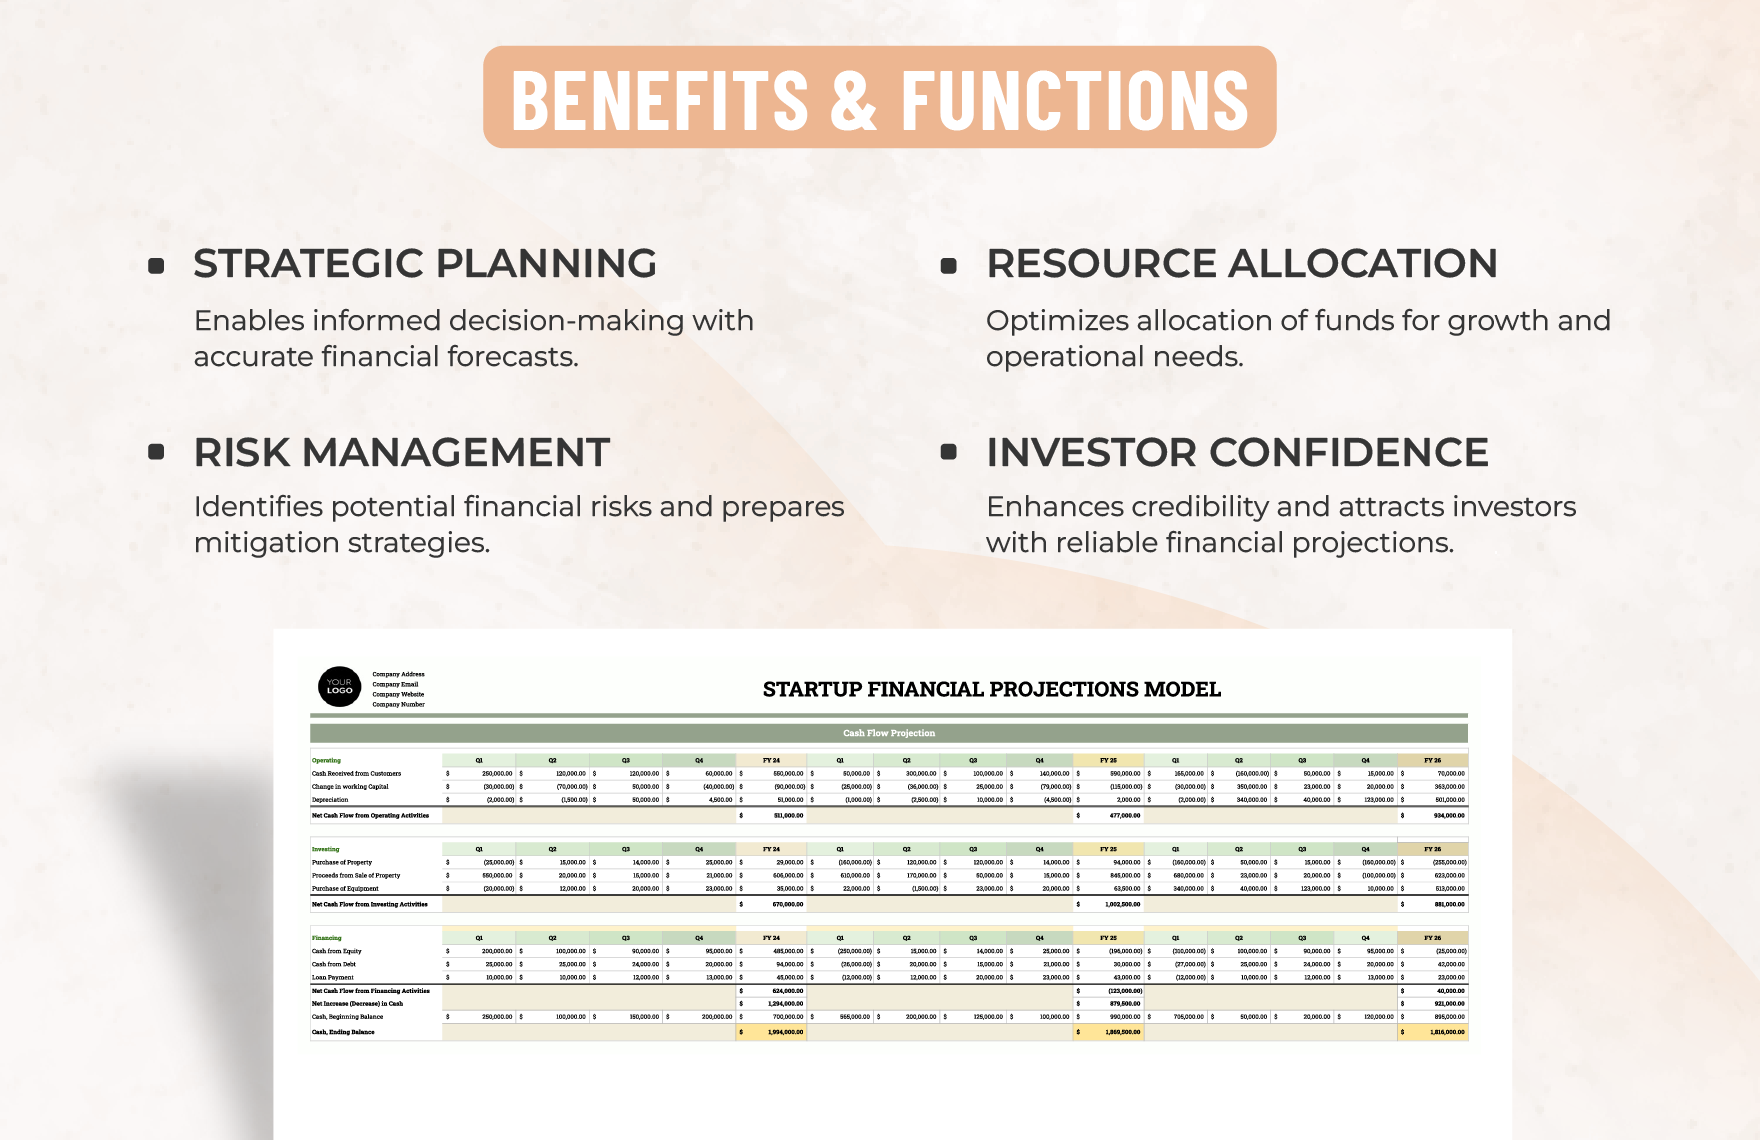 Startup Financial Projections Model Template